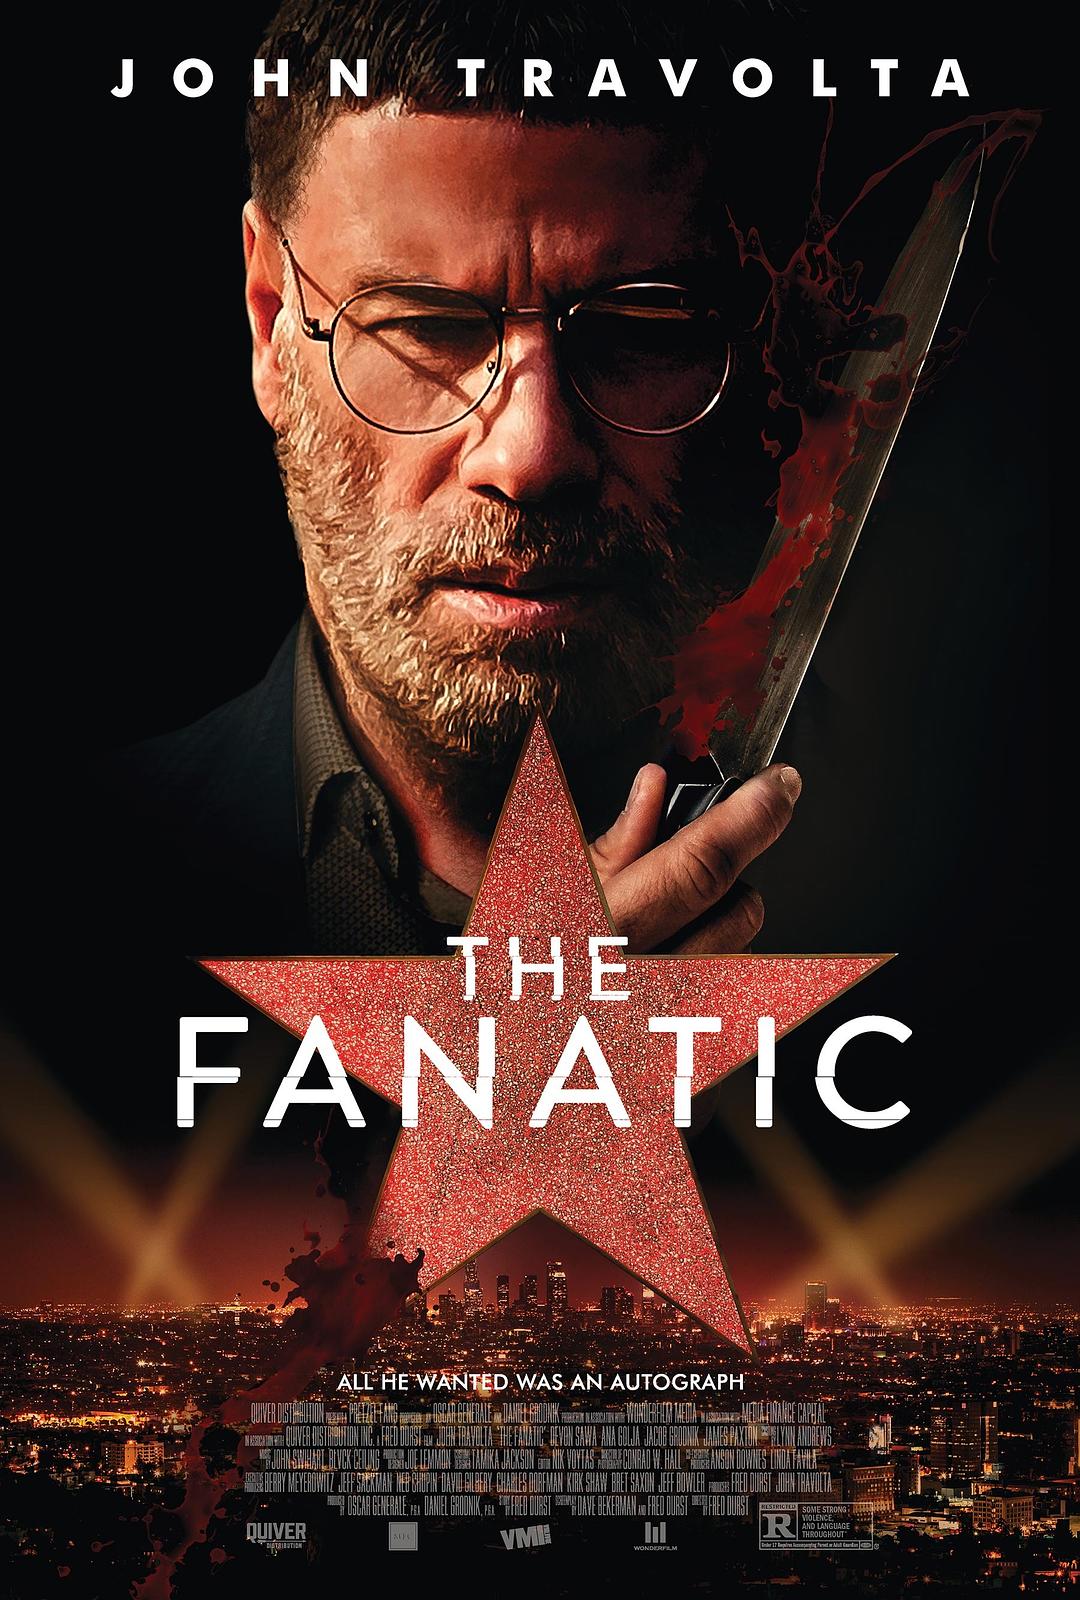  The.Fanatic.2019.1080p.BluRay.AVC.DD5.1-FGT 16.91GB-1.png